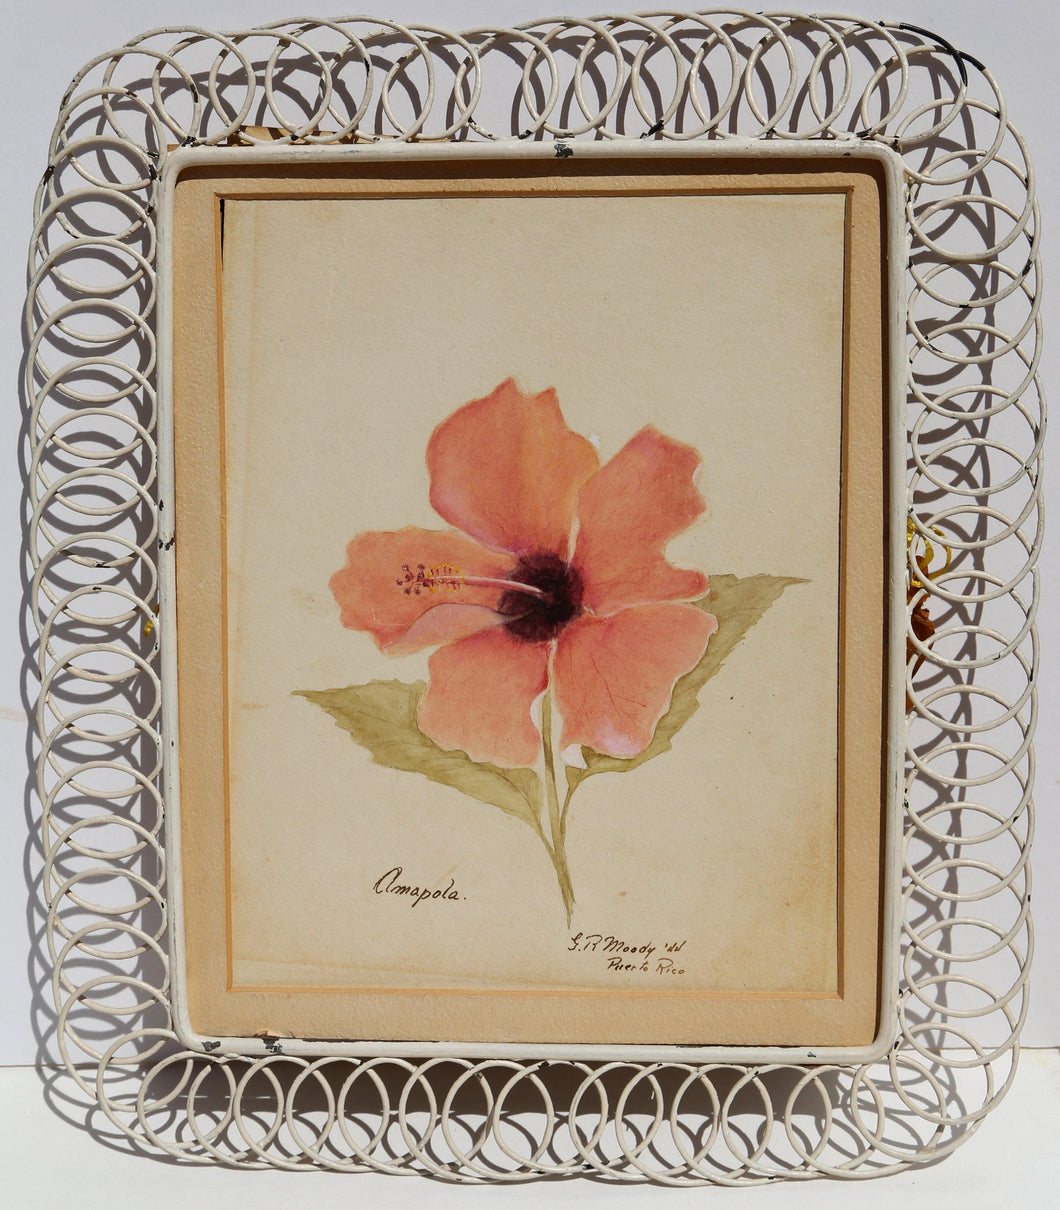 Amapola - Puerto Rico Watercolor | G.R. Moody,{{product.type}}